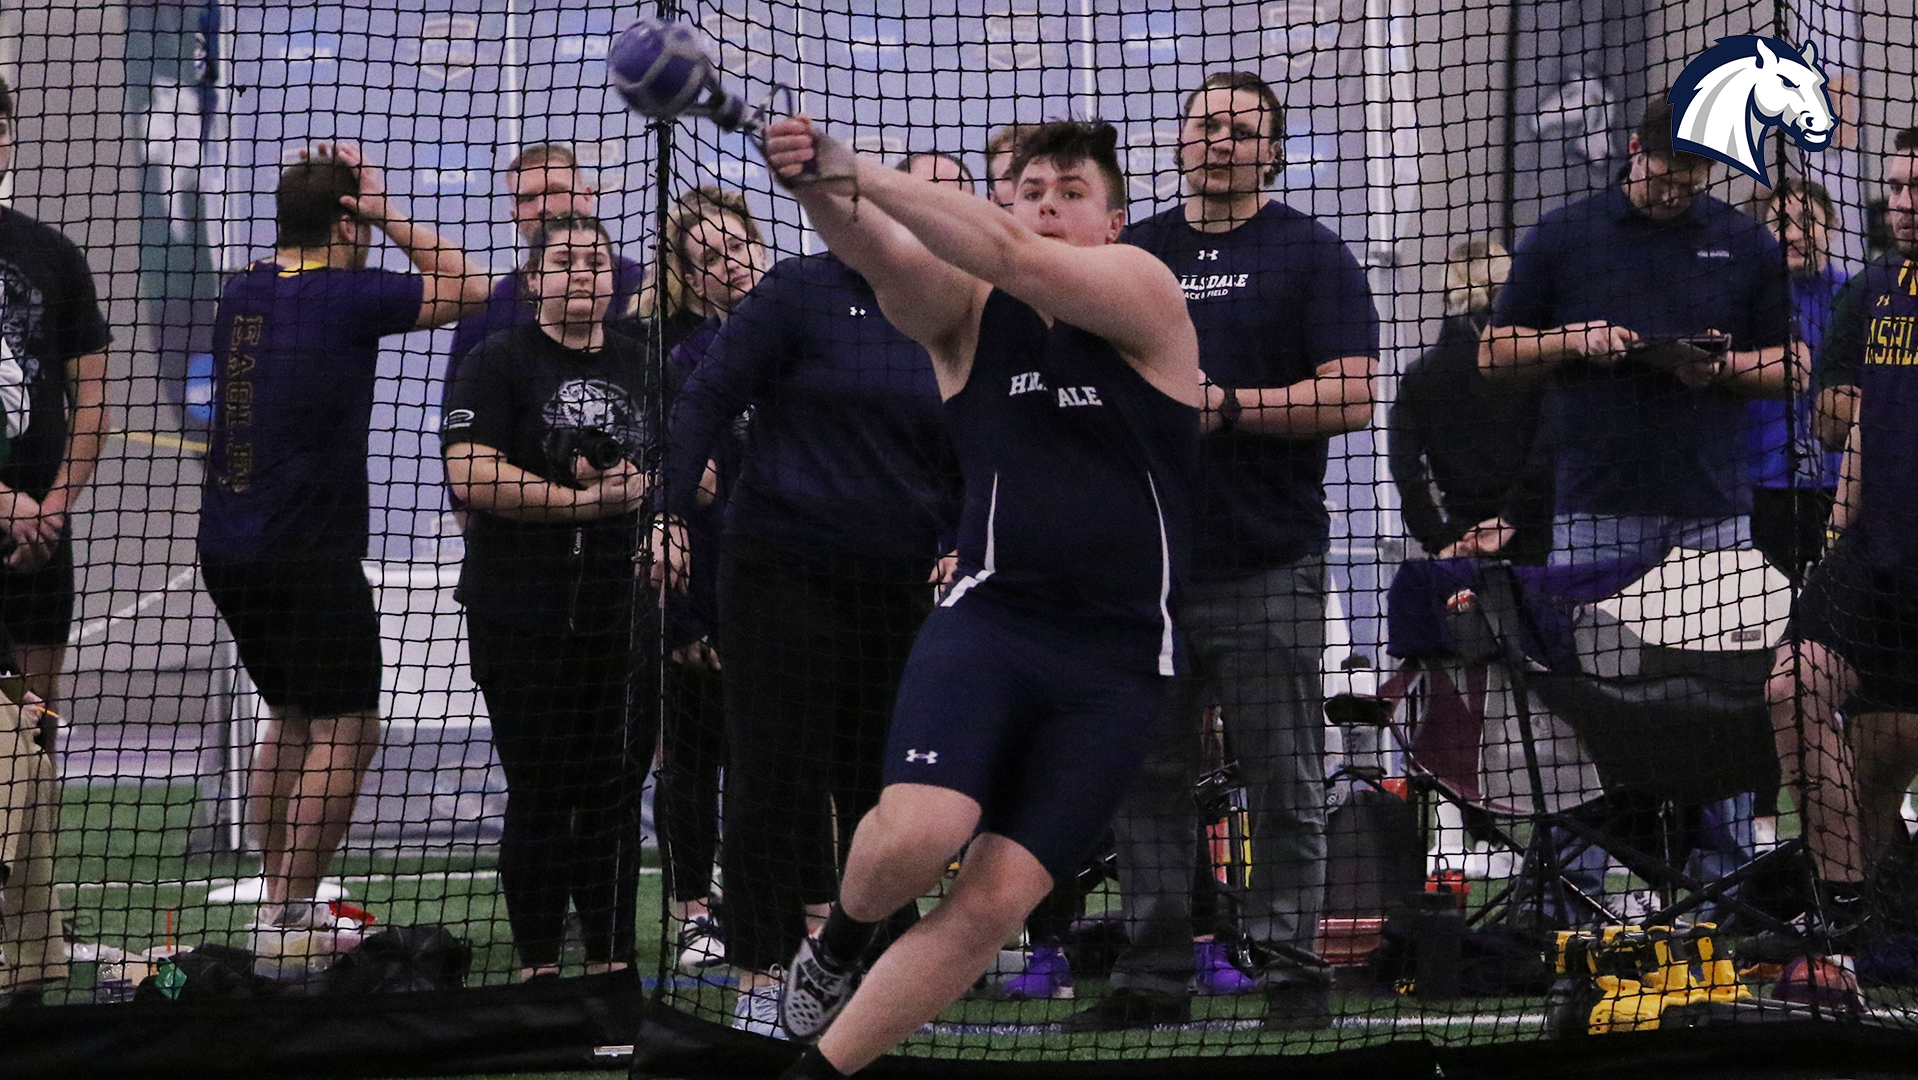 Chargers' Haas named G-MAC Field Athlete of the Week for second time (Jan. 29-Feb. 5)